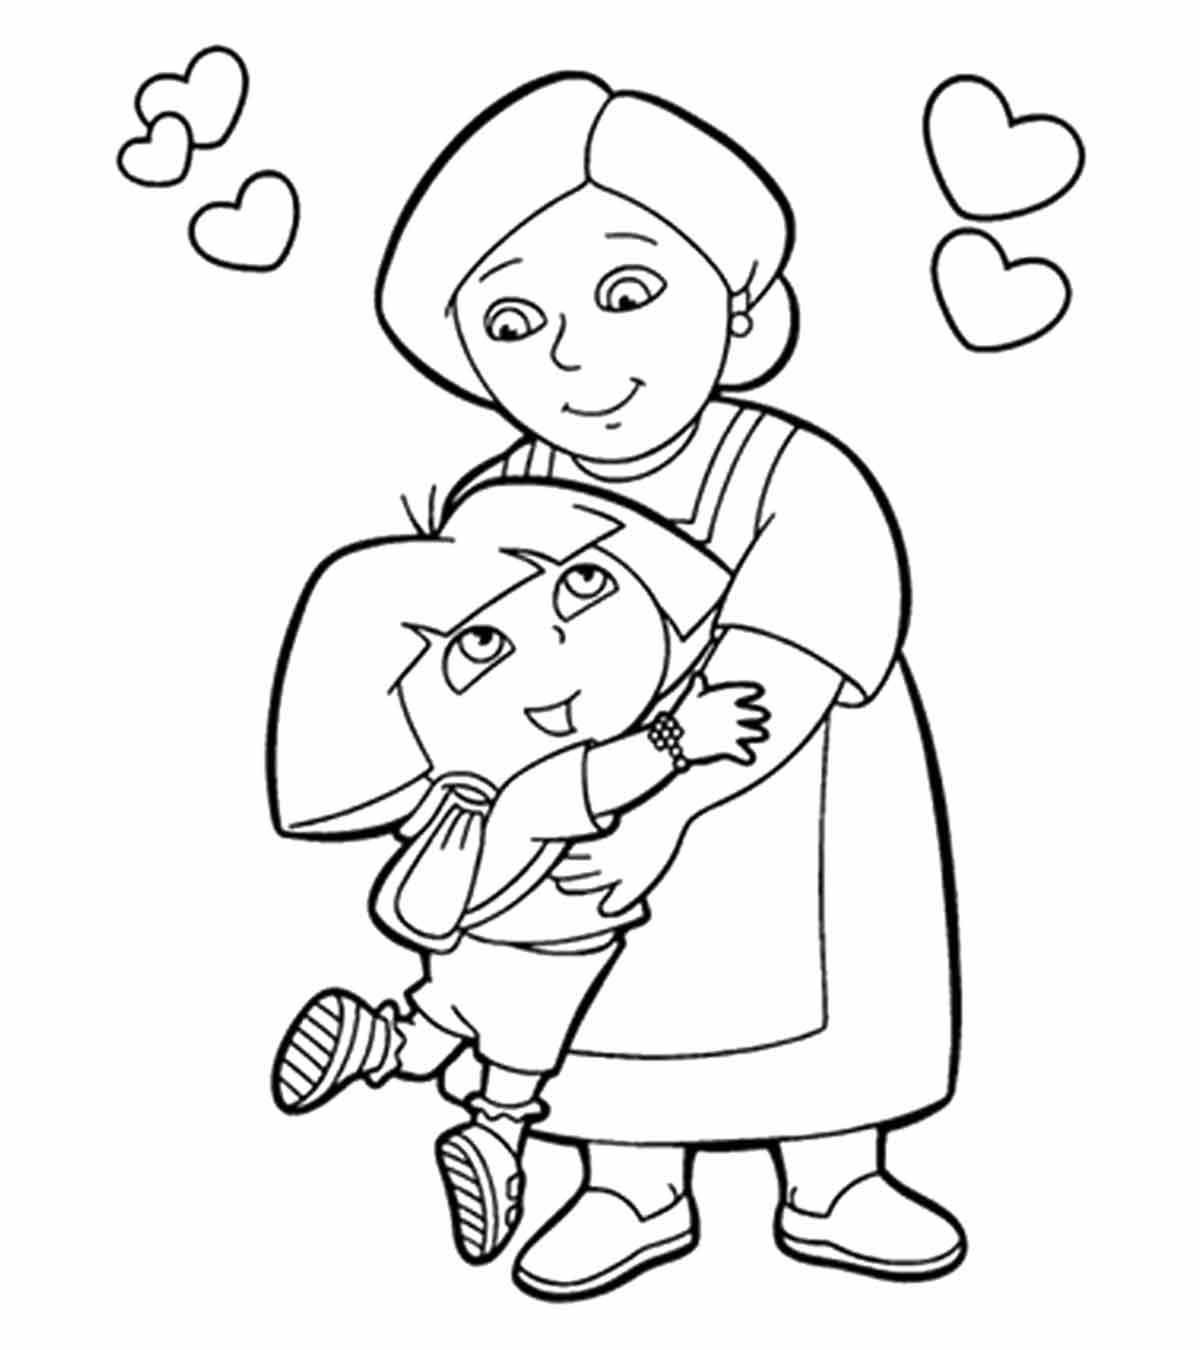 10 Best Grandma Coloring Pages For Your Little Ones